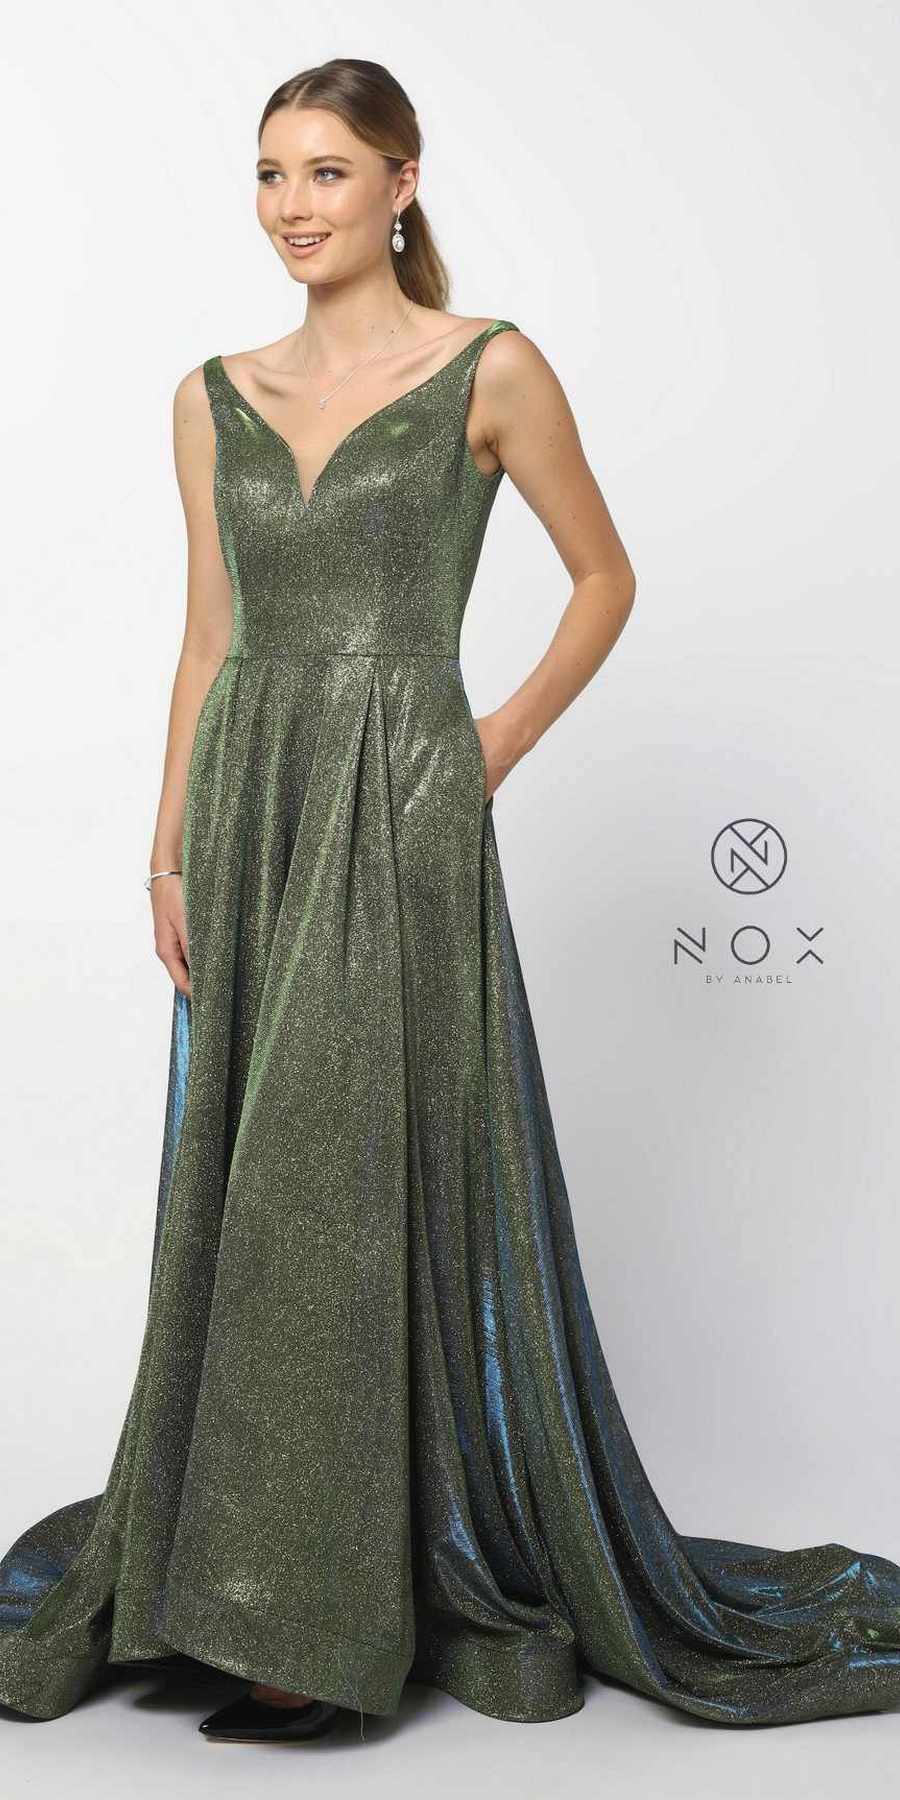 Green Gold Metallic A-line Long Prom Dress V-Neck and Back